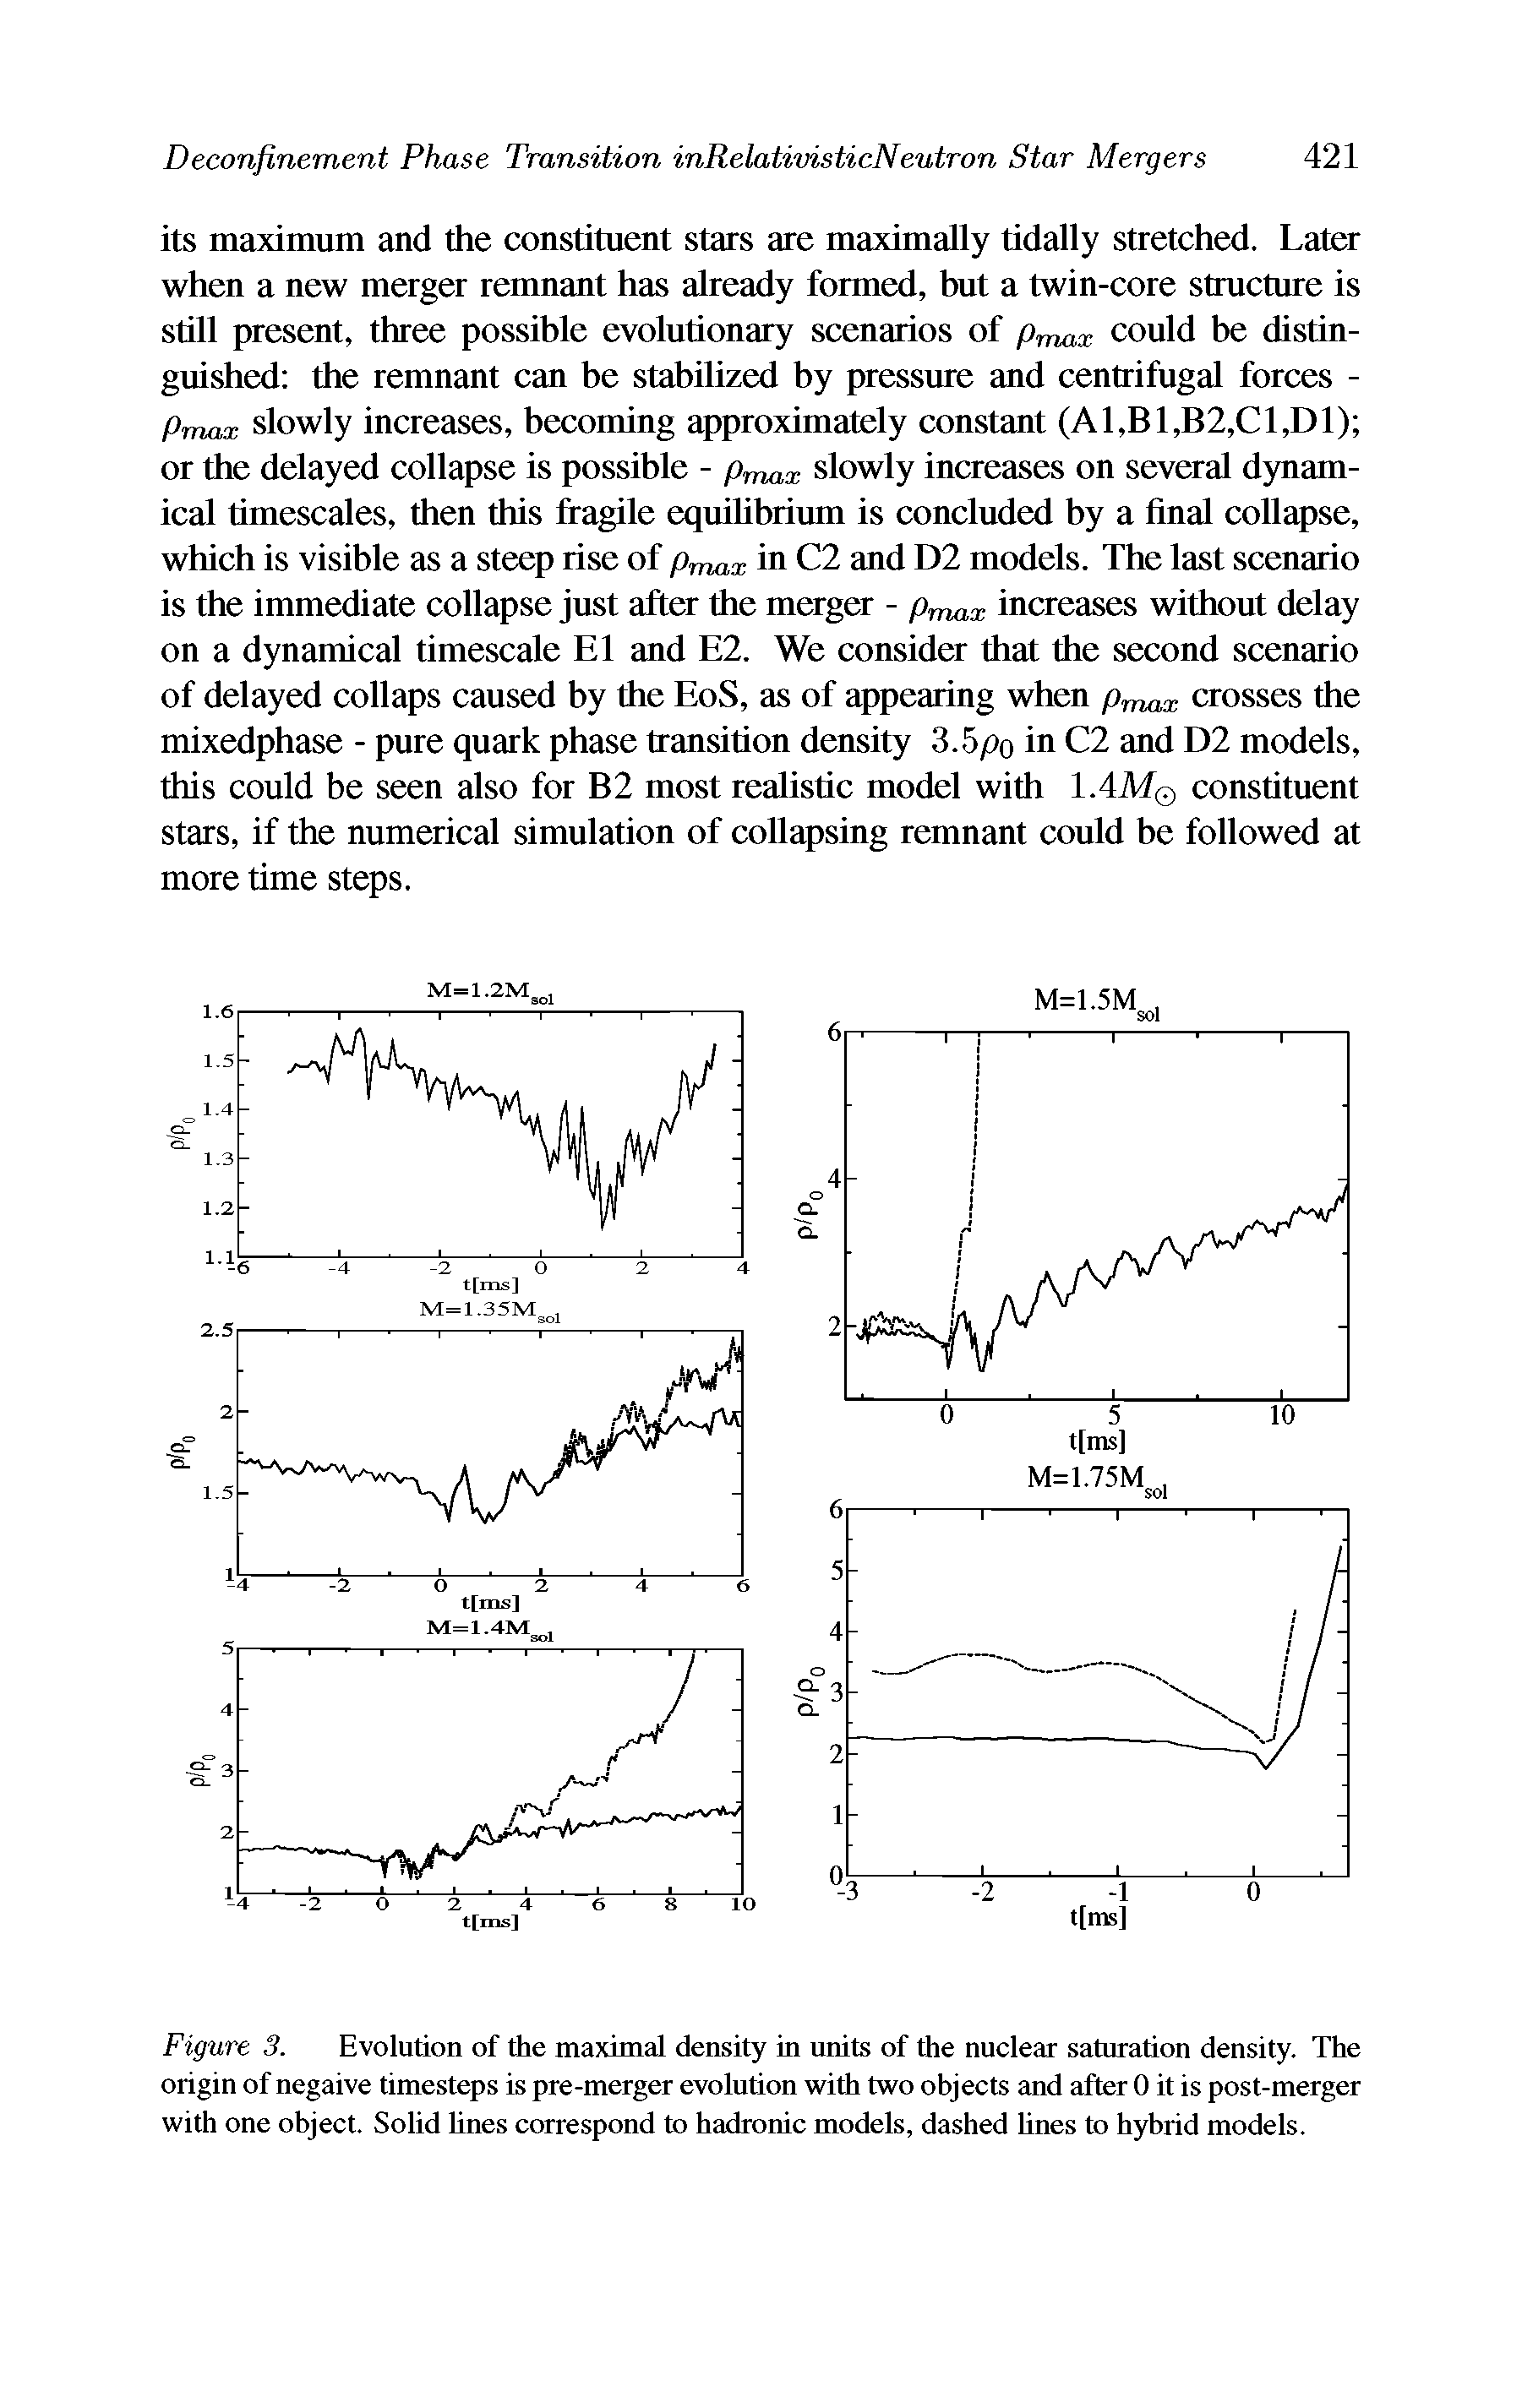 Figure 3. Evolution of the maximal density in units of the nuclear saturation density. The origin of negaive timesteps is pre-merger evolution with two objects and after 0 it is post-merger with one object. Solid lines correspond to hadronic models, dashed lines to hybrid models.